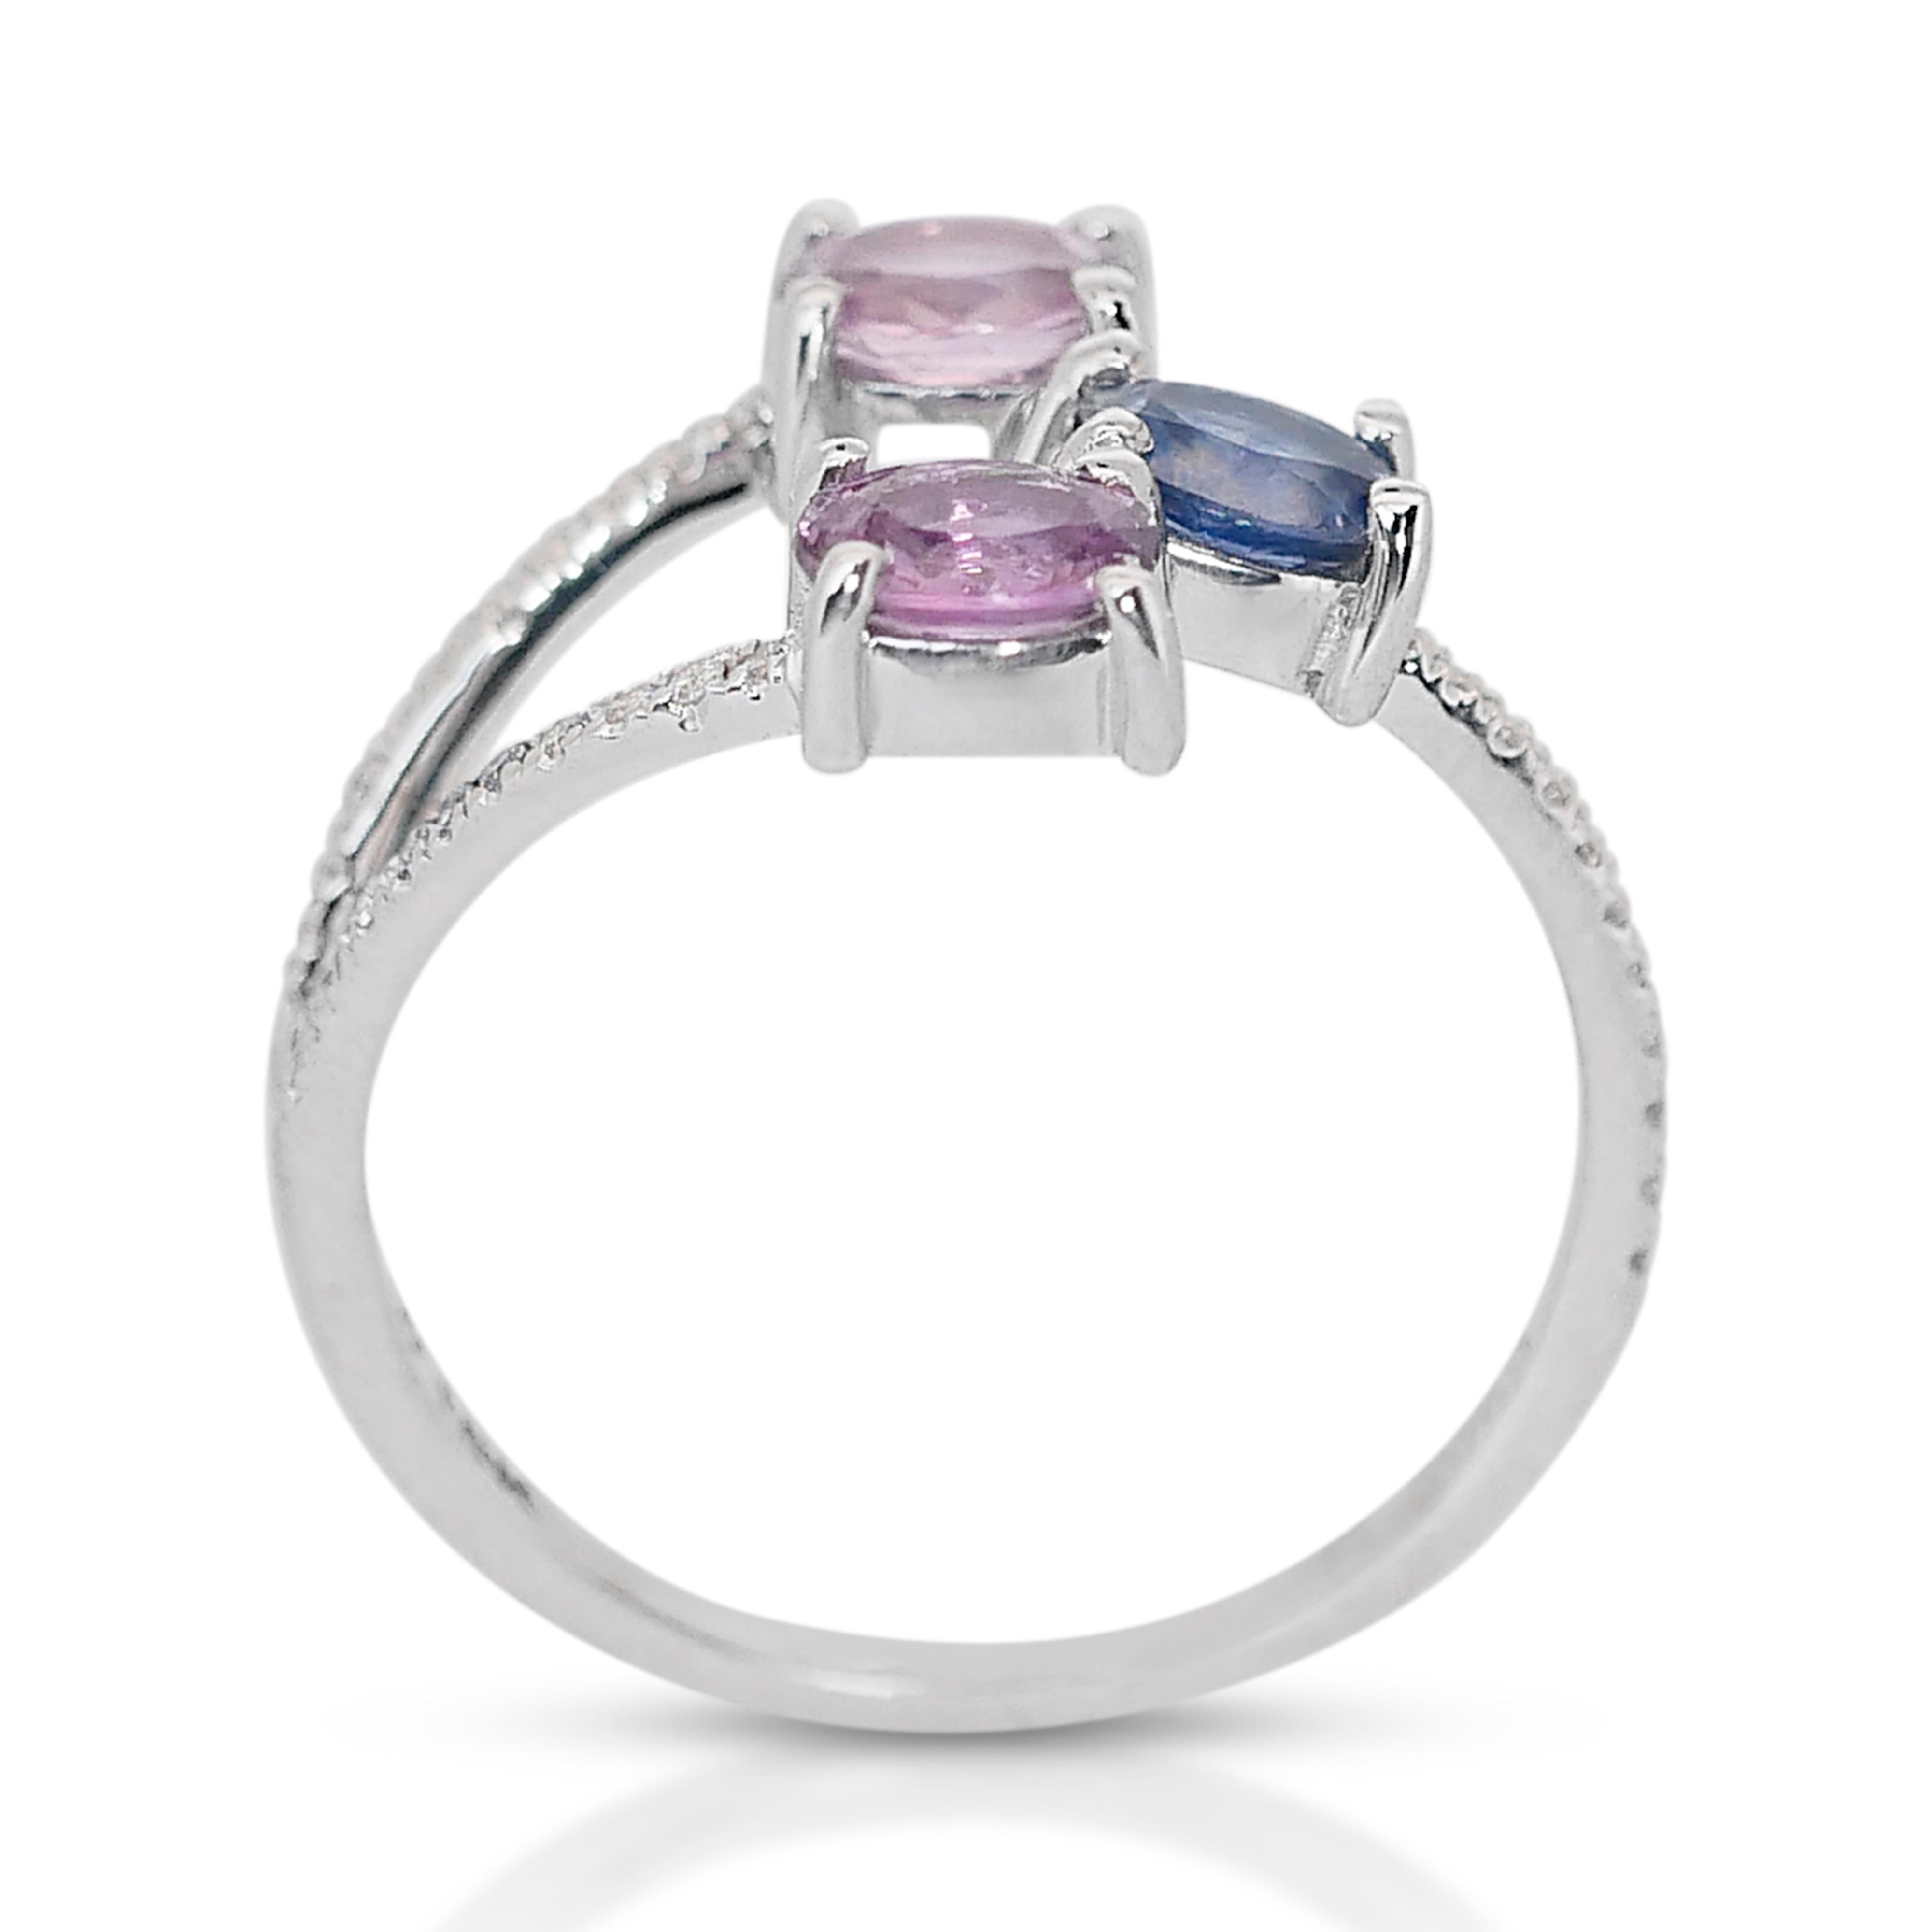 Stylish 1.17ct Sapphires and Diamonds Fancy-Colored Ring in 18k White Gold - IGI In New Condition For Sale In רמת גן, IL